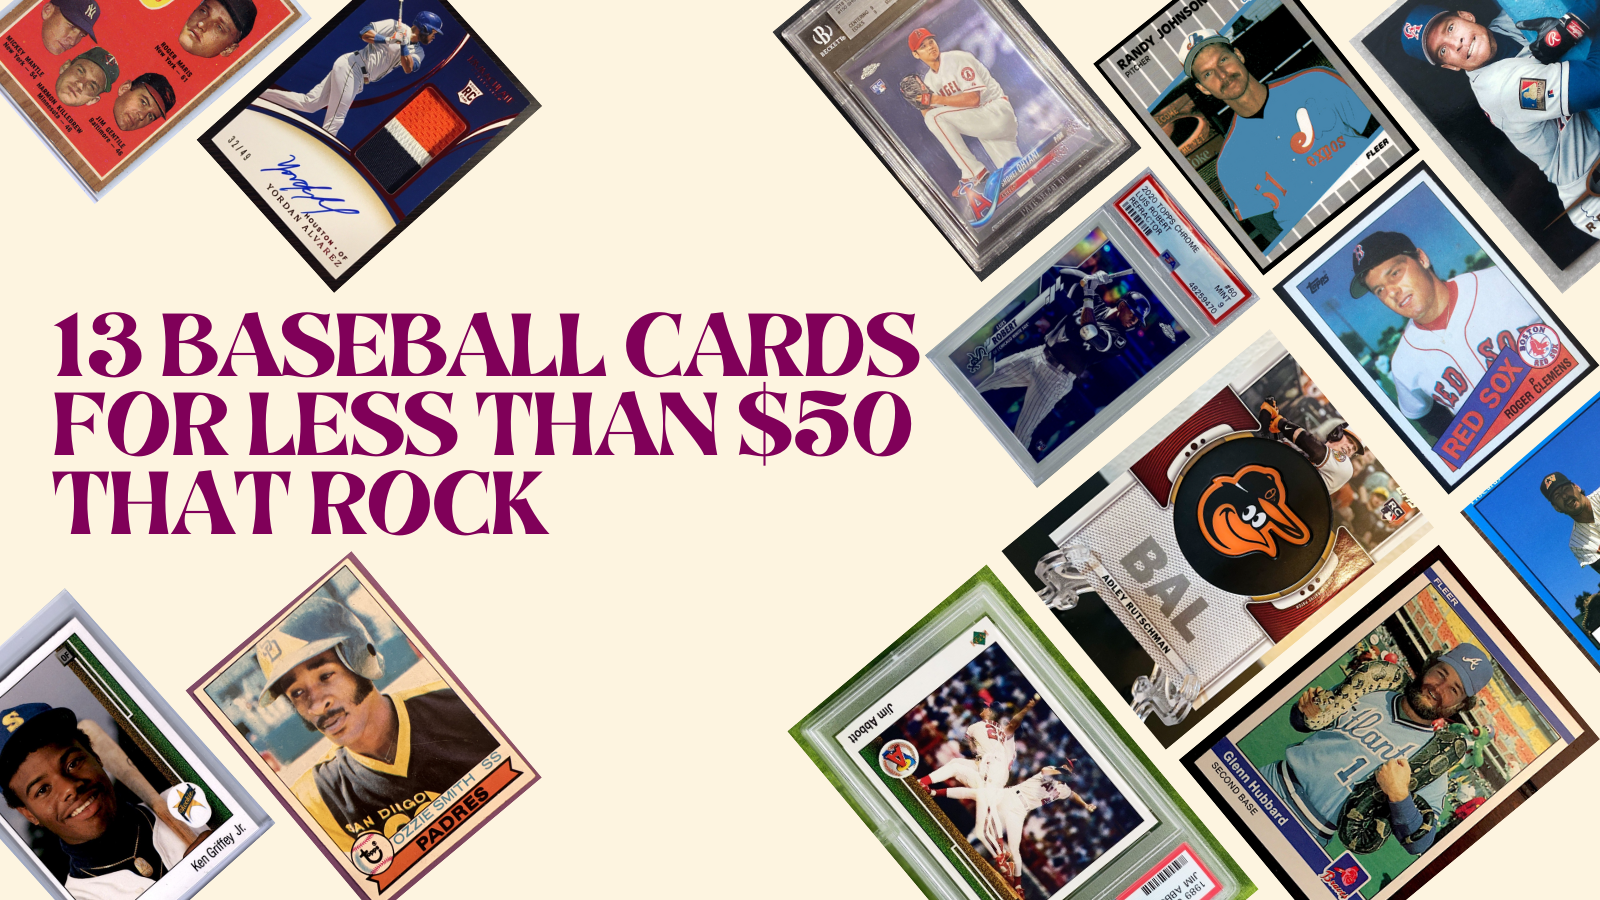 13 Baseball Cards For Less Than $50 That Rock